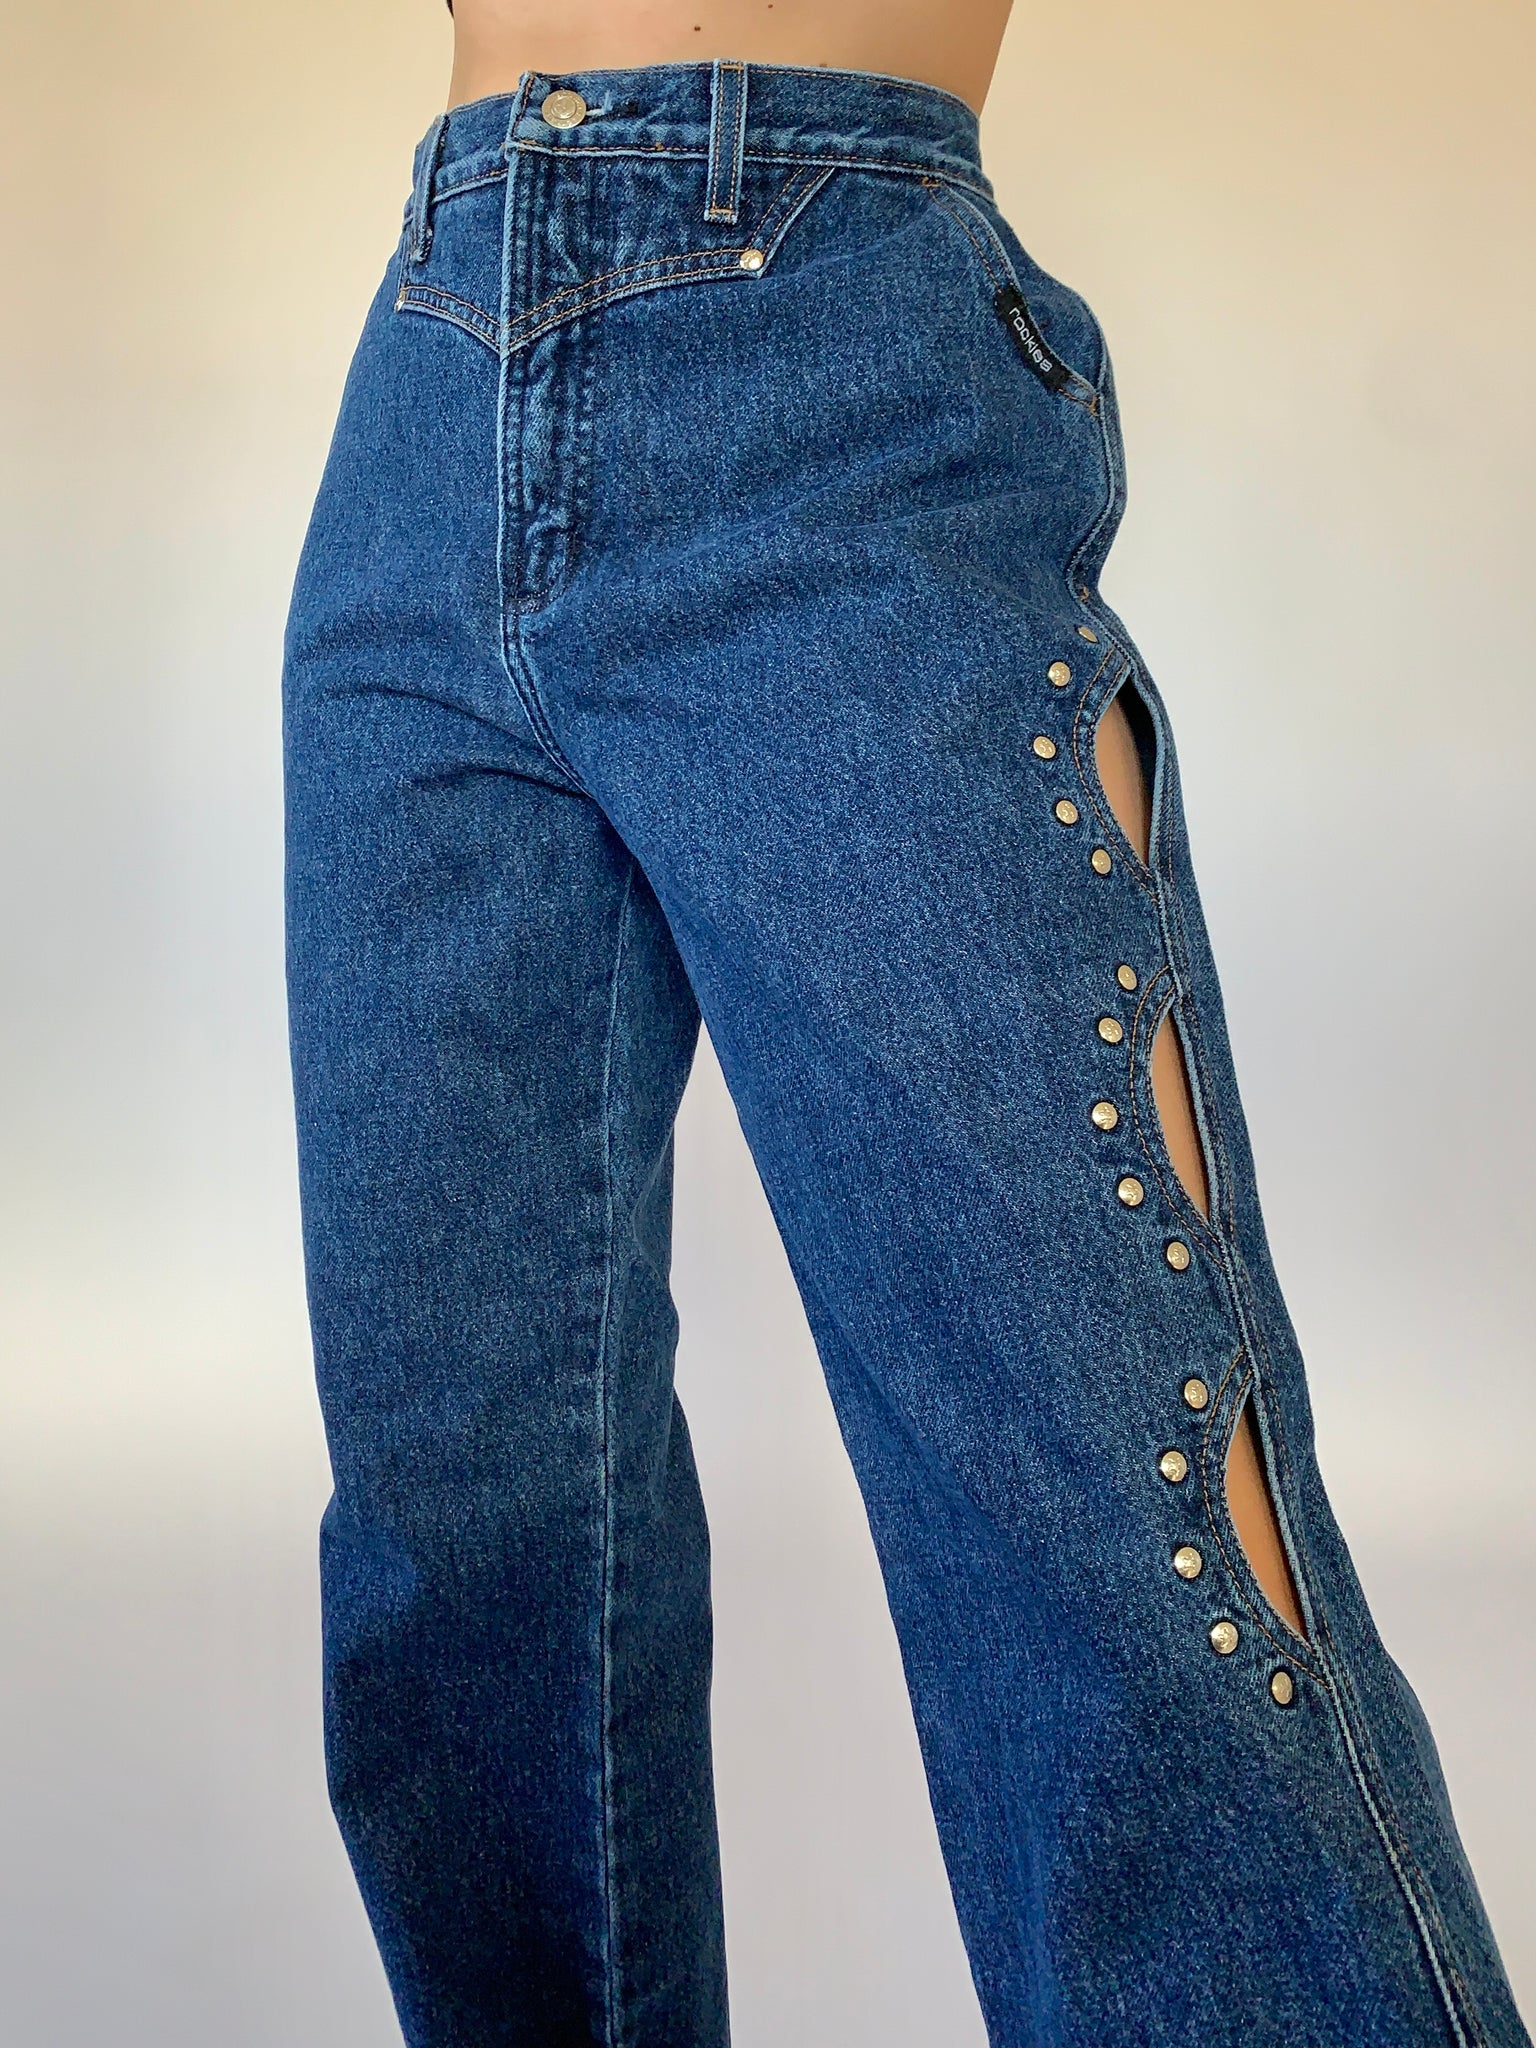 Rockies Vintage Jeans for Women for sale